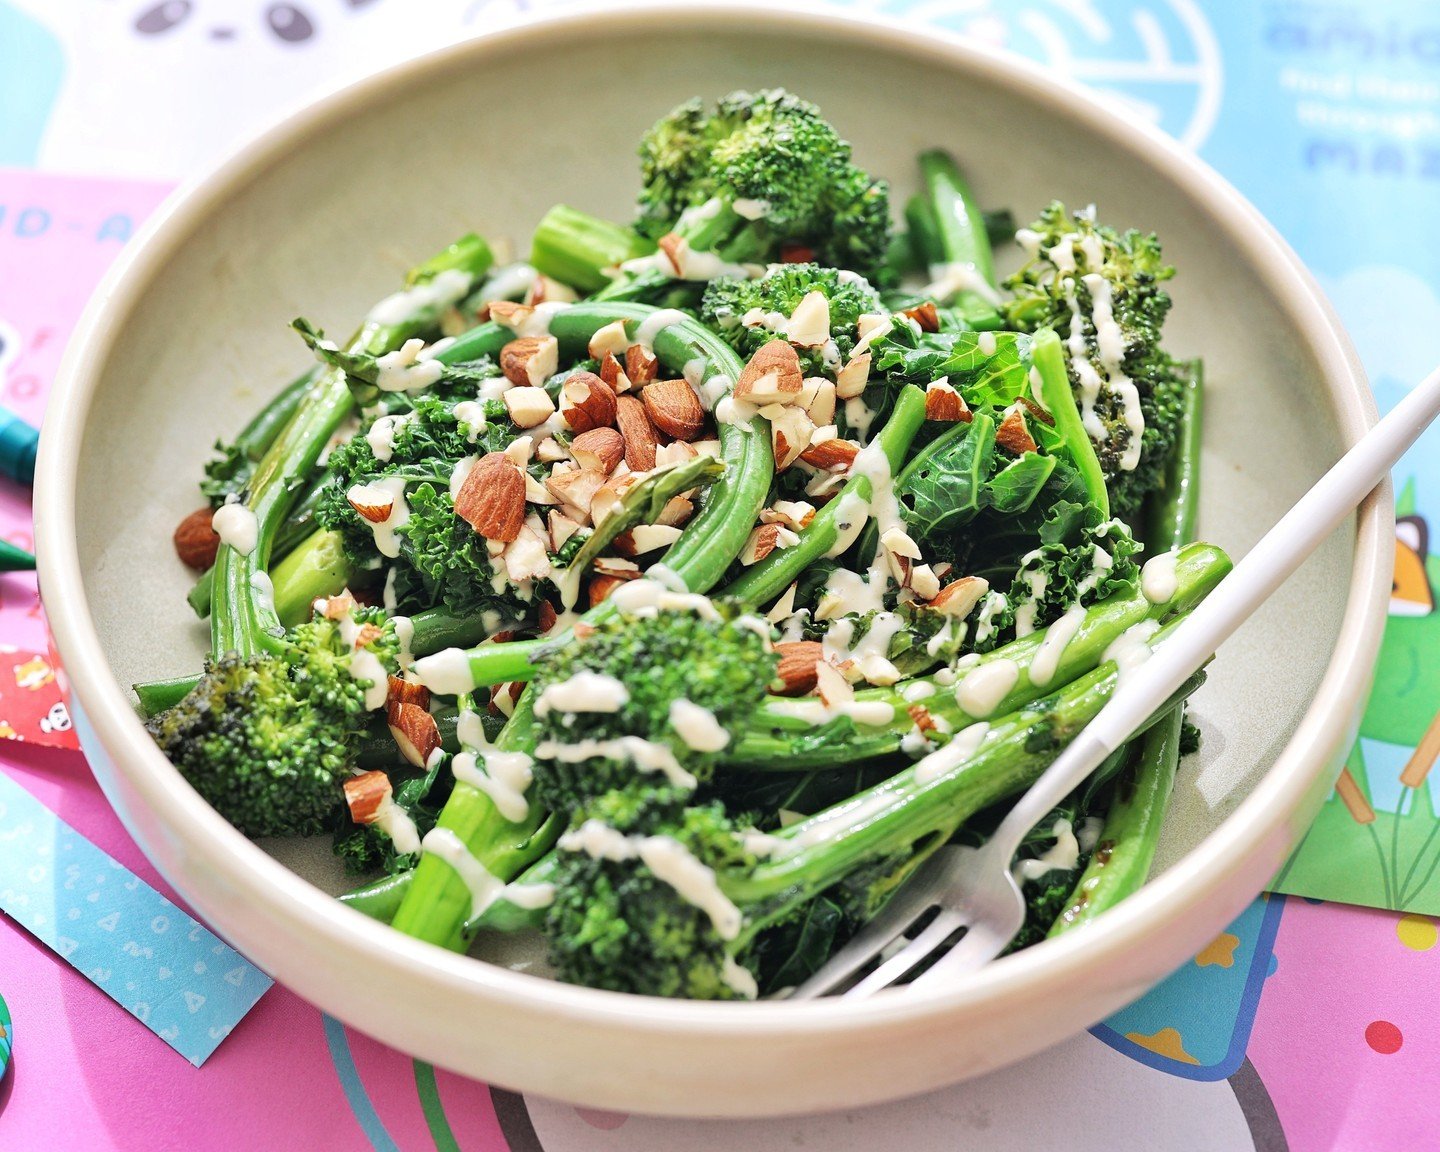 Broccoli just got a whole lot cooler! 🥦😎 

Introducing our Charred Broccolini dish - it's like a superhero for your taste buds!
With a team of green beans and kale, and a special sauce (tahini dressing), this veggie squad is here to save the day!
A